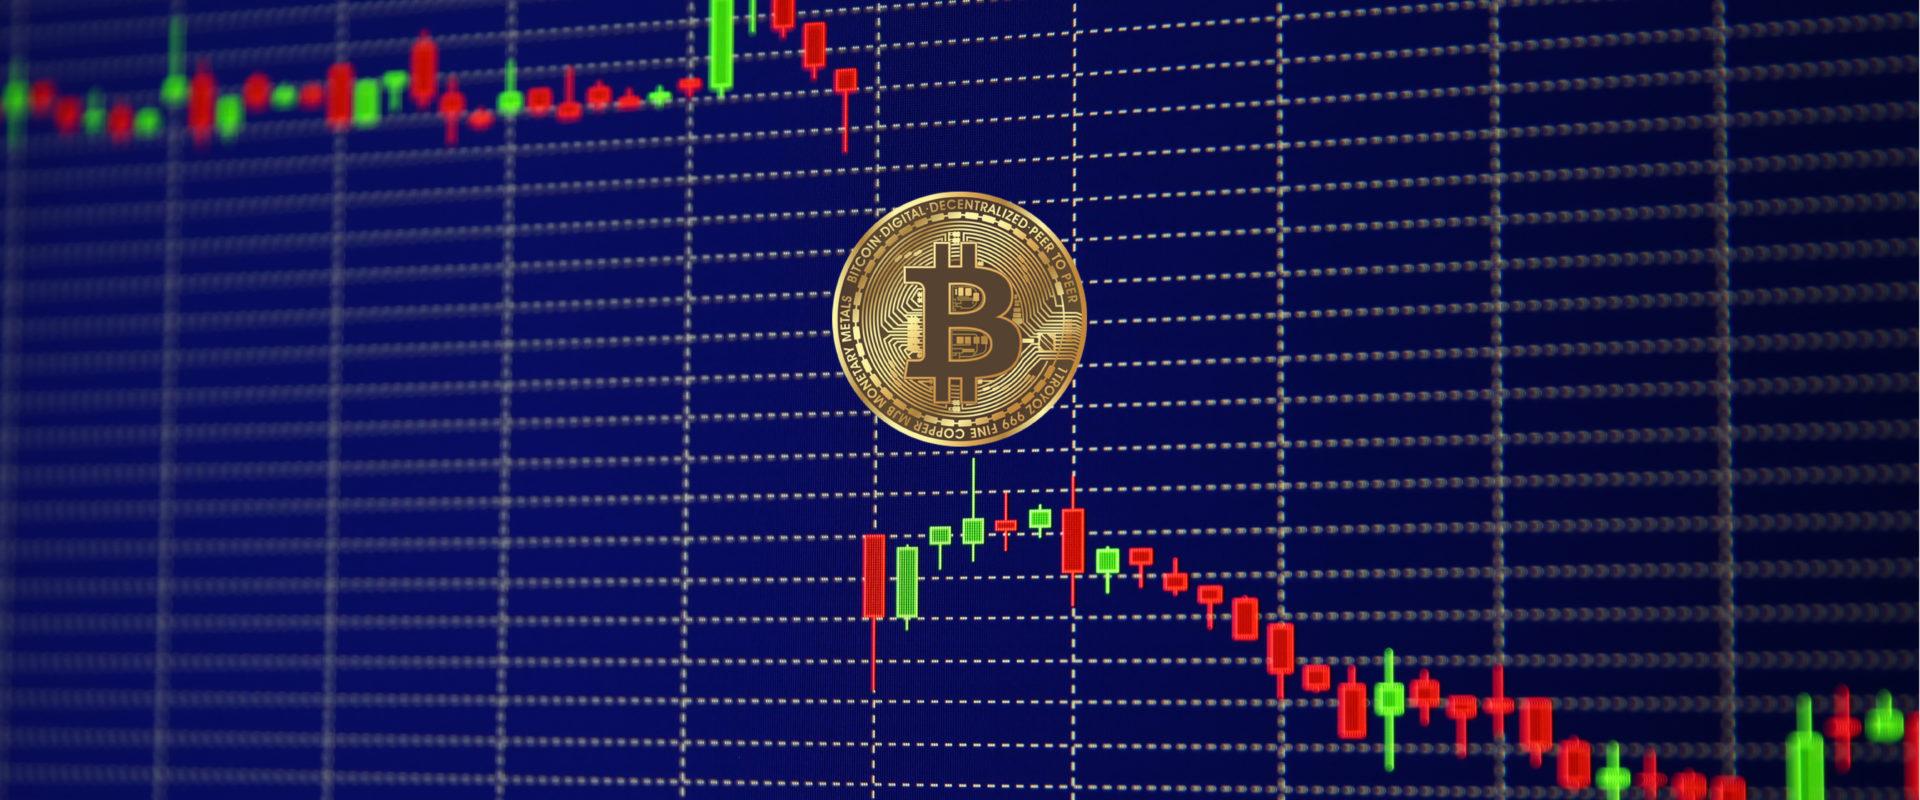 American Investors Finding BTC Interesting as Halving Approaching